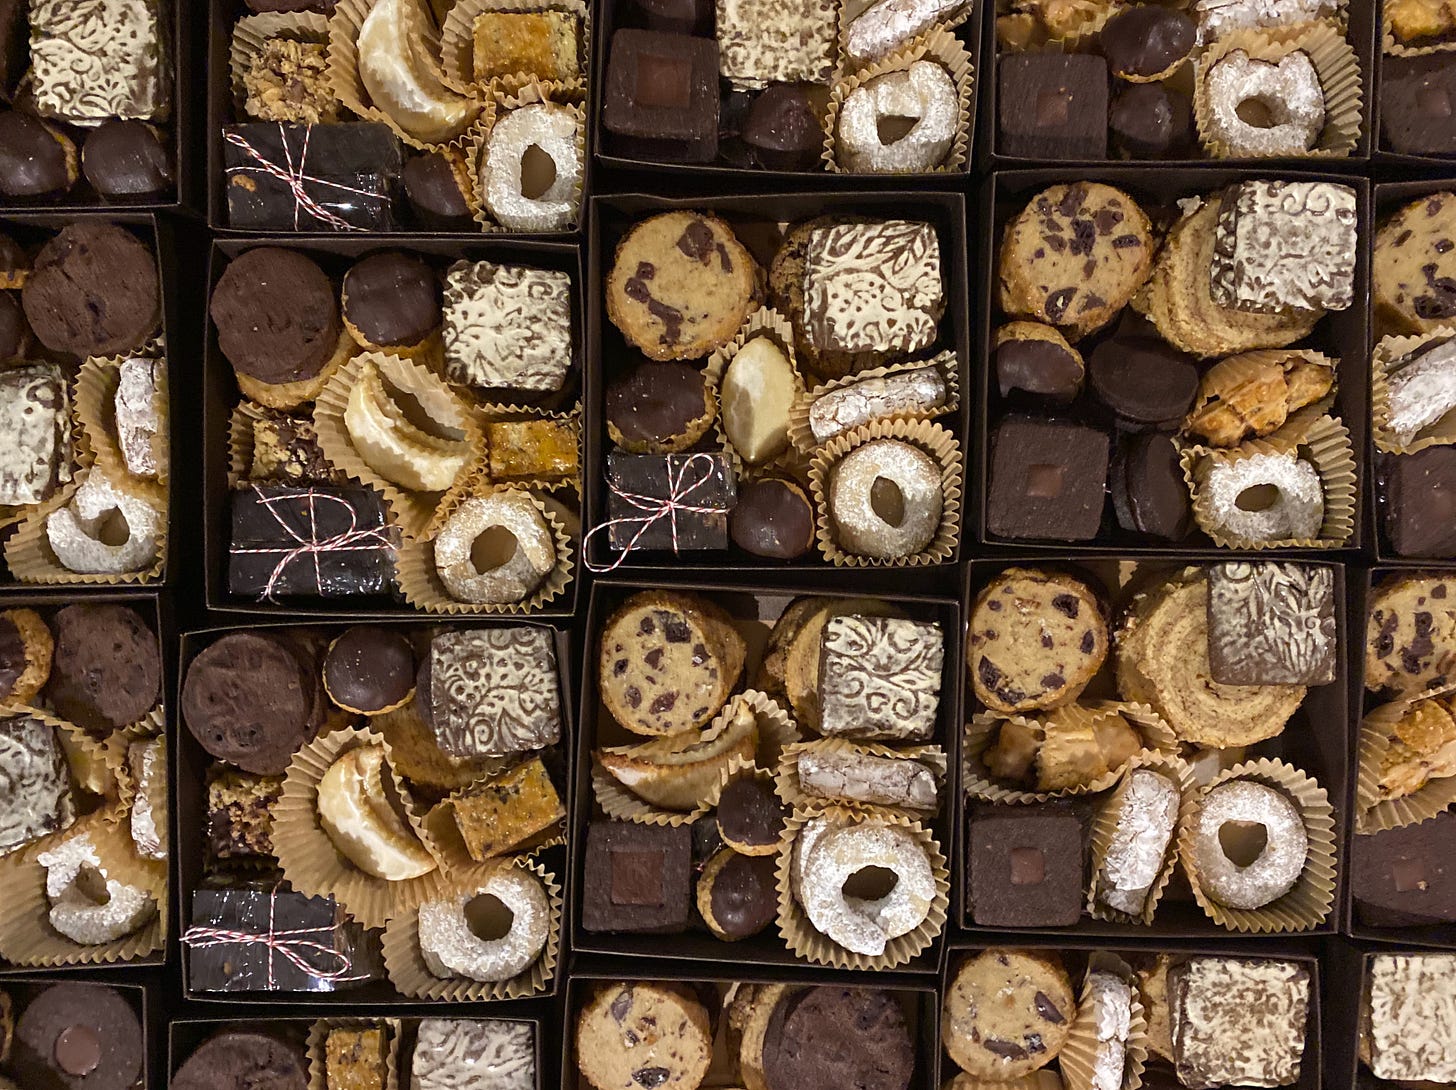 A closeup of many small square cookie boxes in tight rows. Each box contains the same cookies, a mix of round shortbreads, crescent shaped cookies, rings coated in powdered sugar, square chocolate cookies, rugelach, and others.